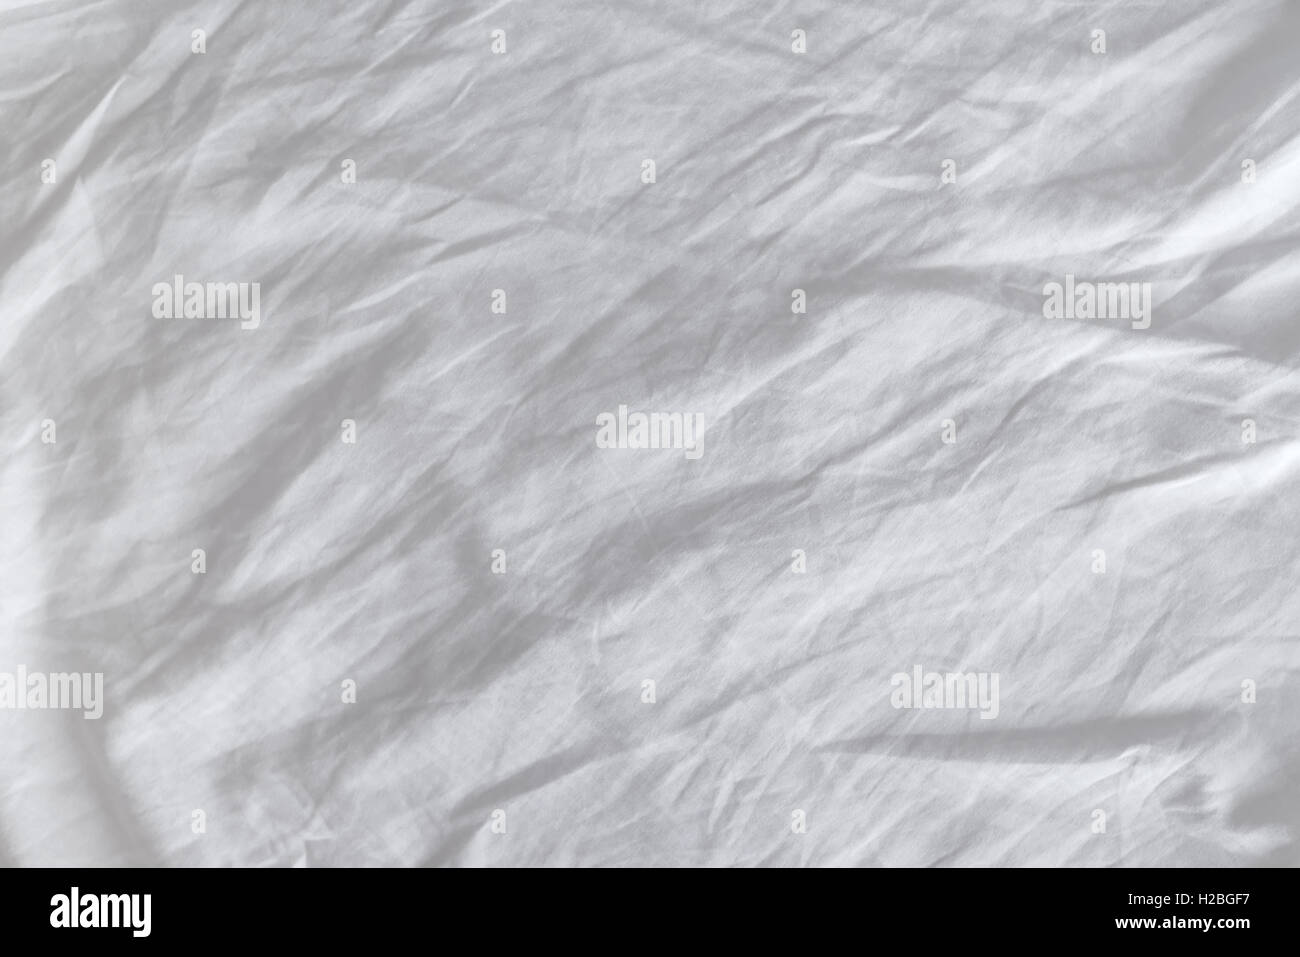 Crumpled white cotton sheets texture, top view of wrinkles on an untidy bed. Stock Photo